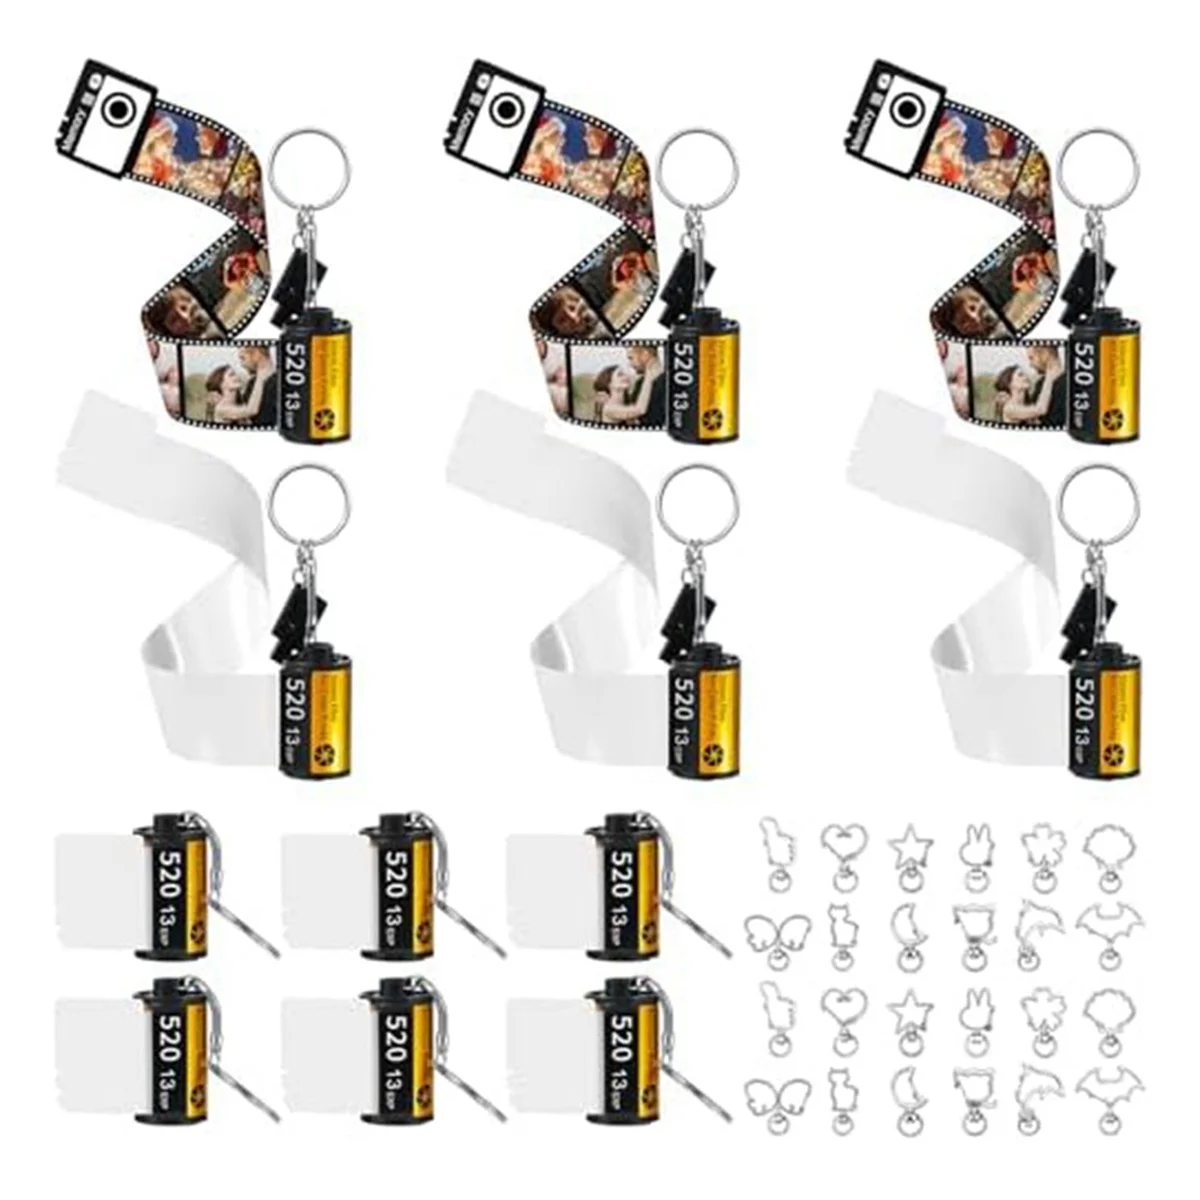 

12 PCS Sublimation Camera Film Roll Keychains with Replacement Keyrings Photo Keychains for Birthday DIY Crafts